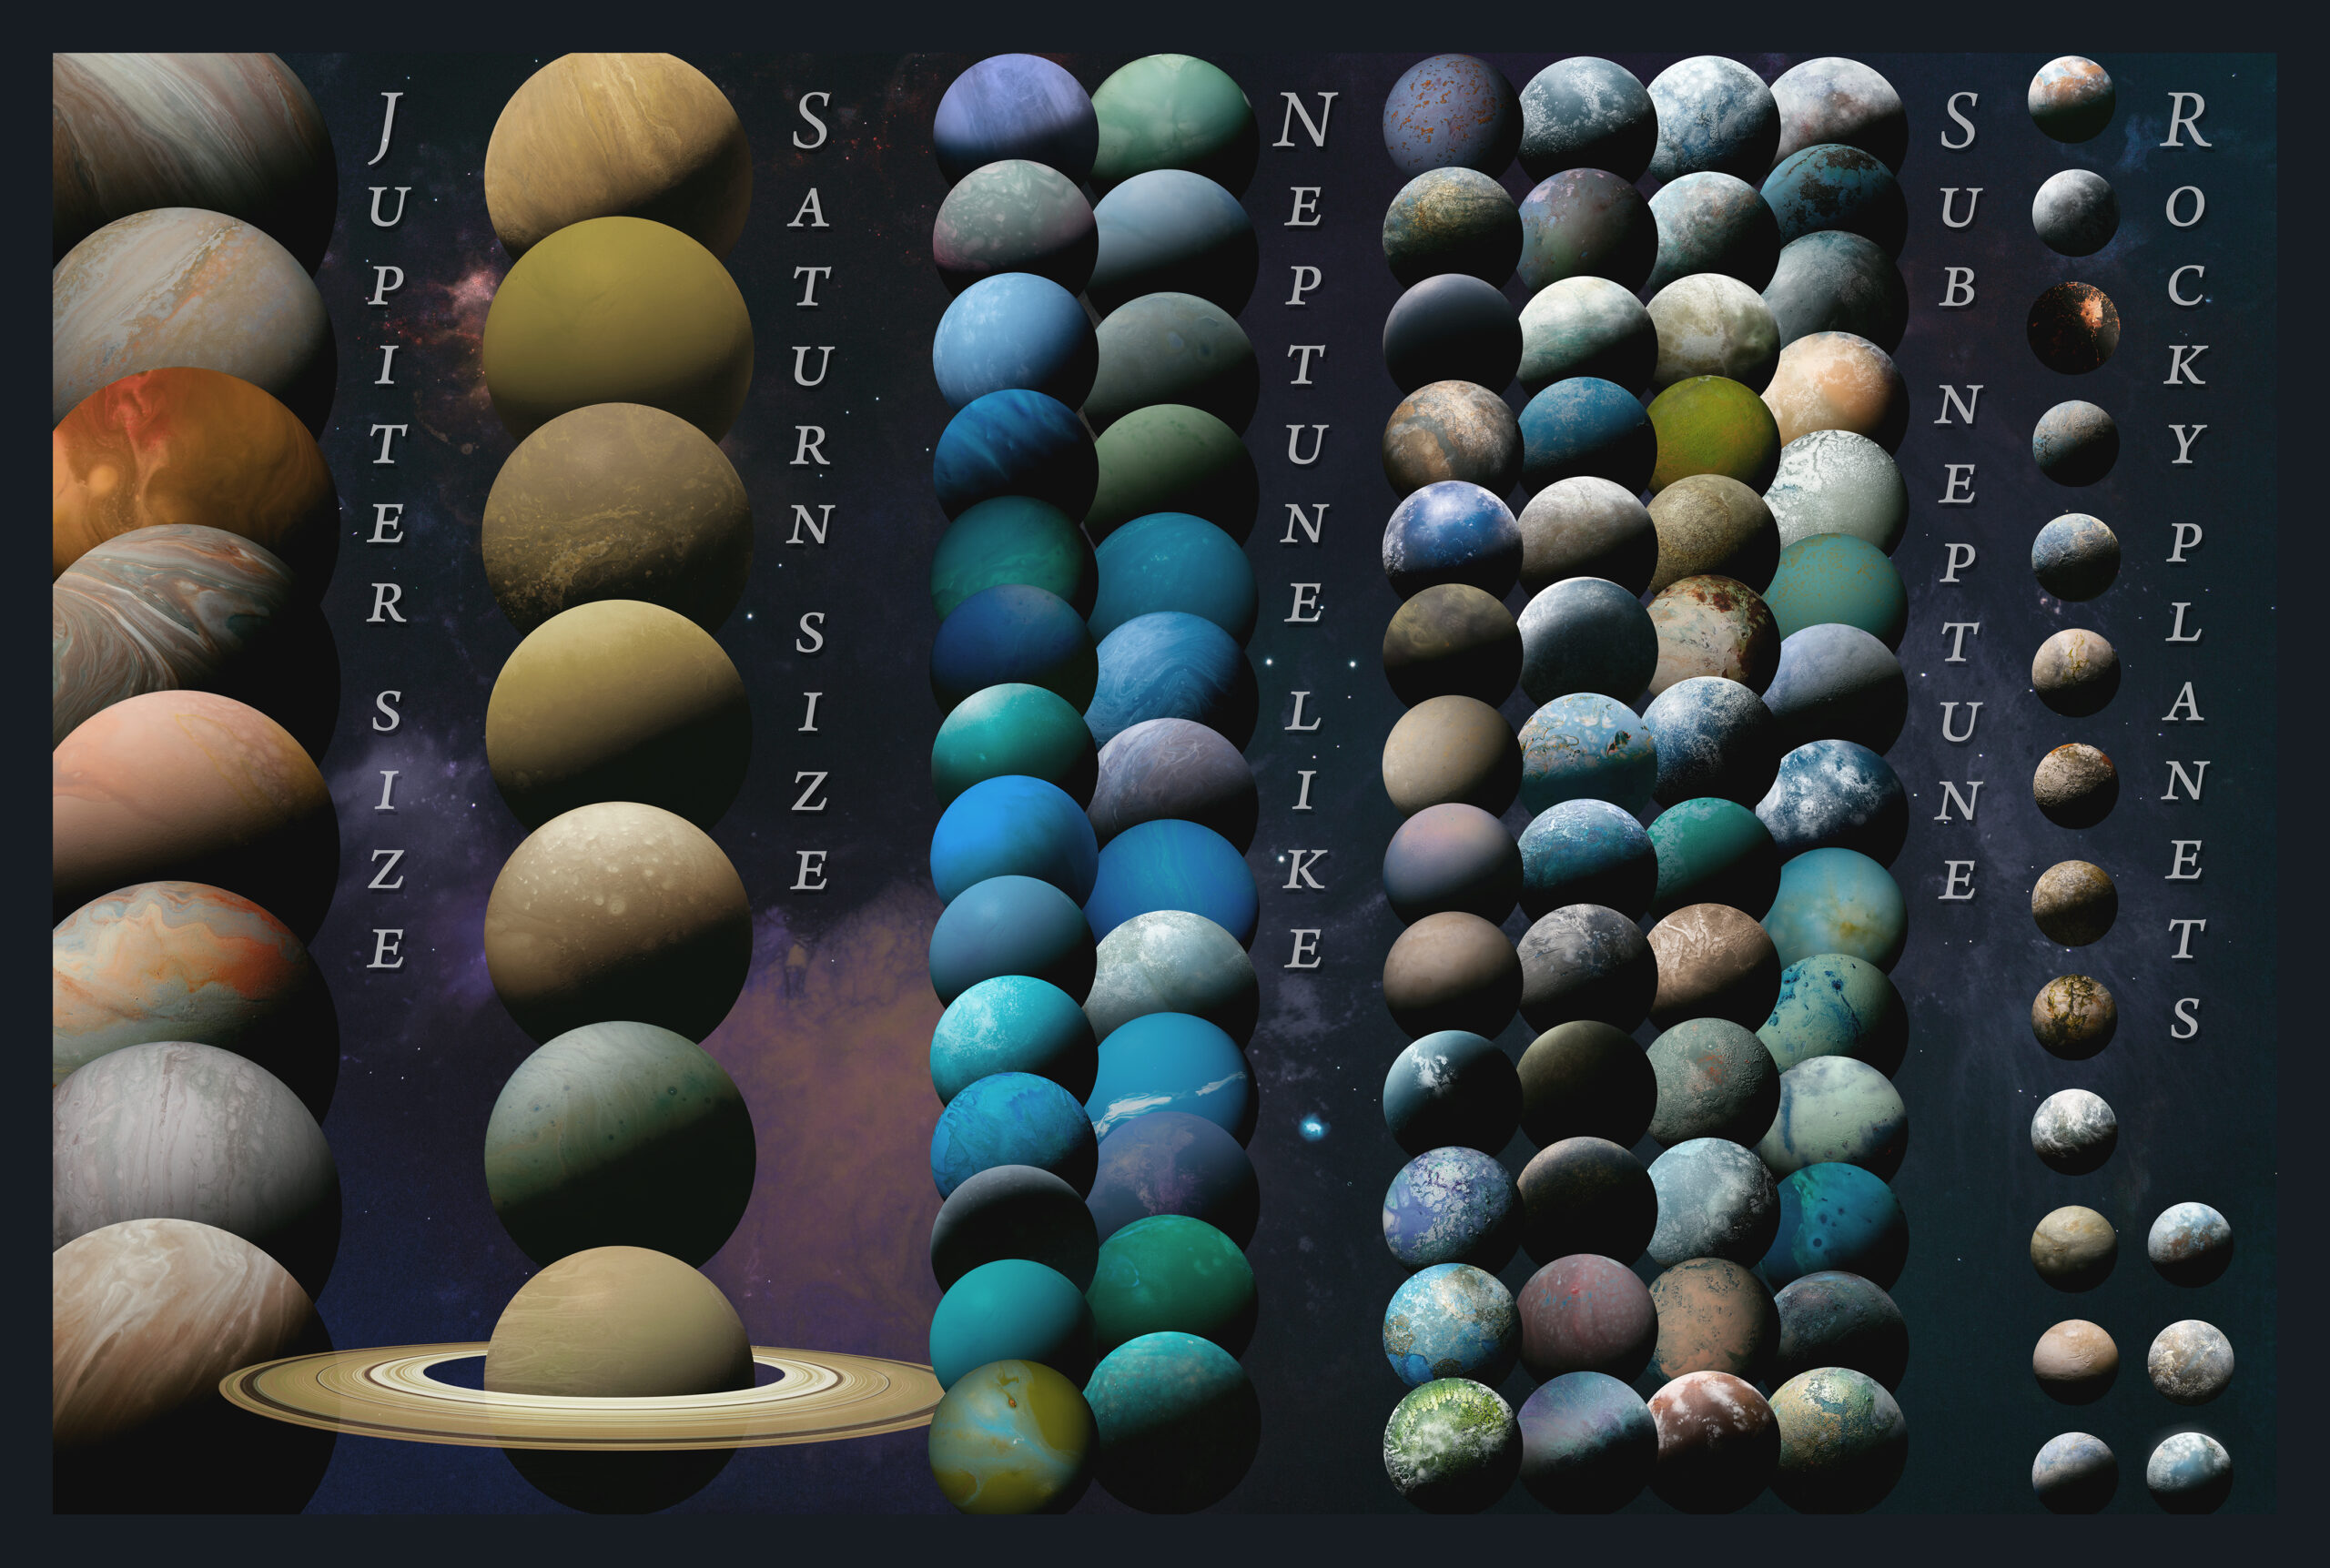 Artist’s rendition of the variety of exoplanets featured in the new NASA TESS-Keck Survey Mass Catalog. (Credit: W. M. Keck Observatory/Adam Makarenko)